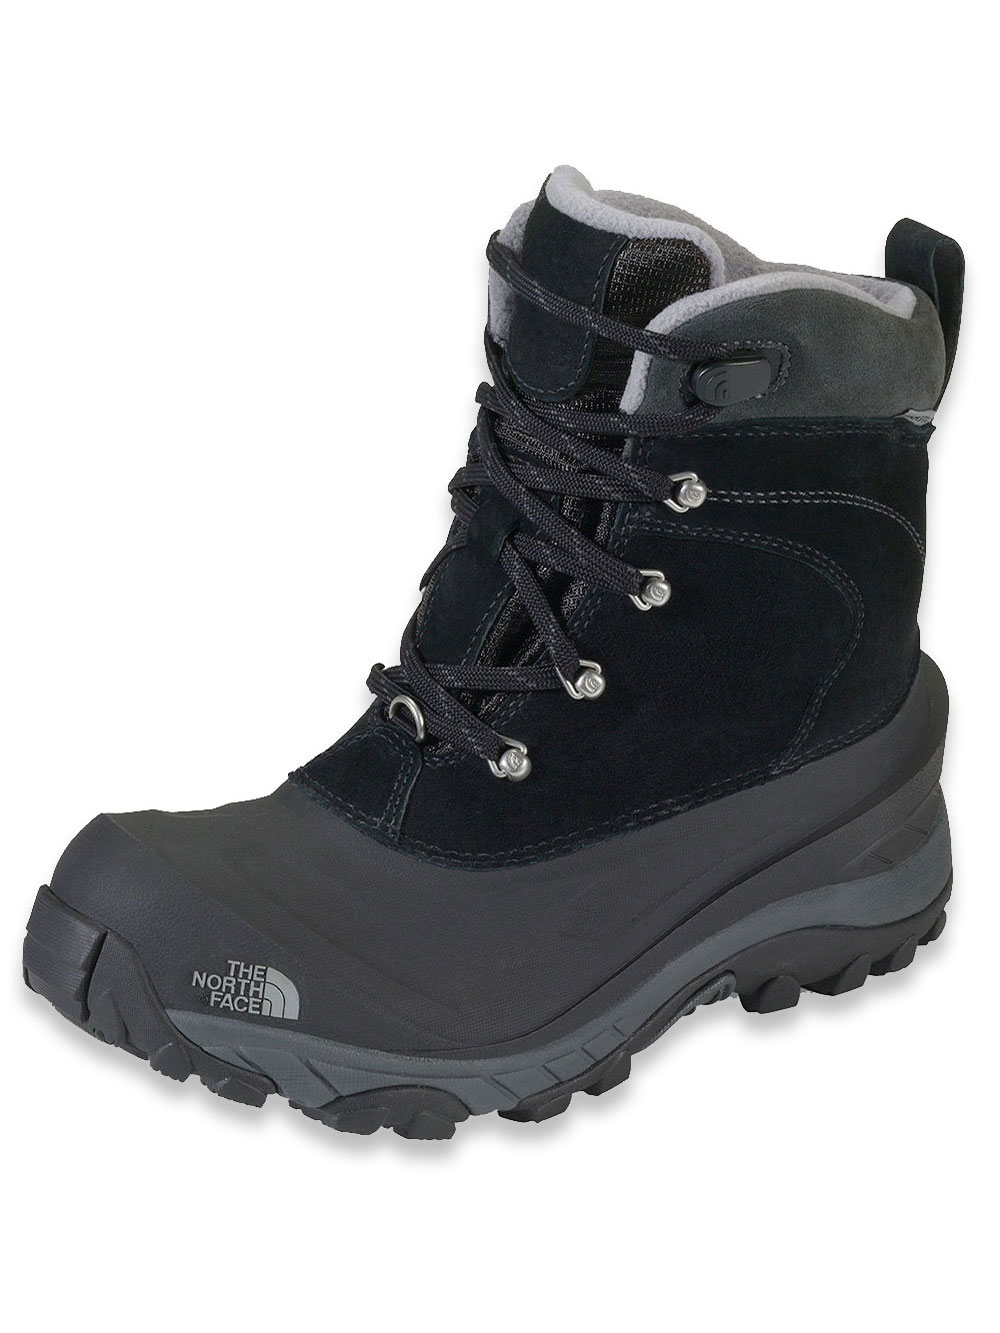 black north face boots